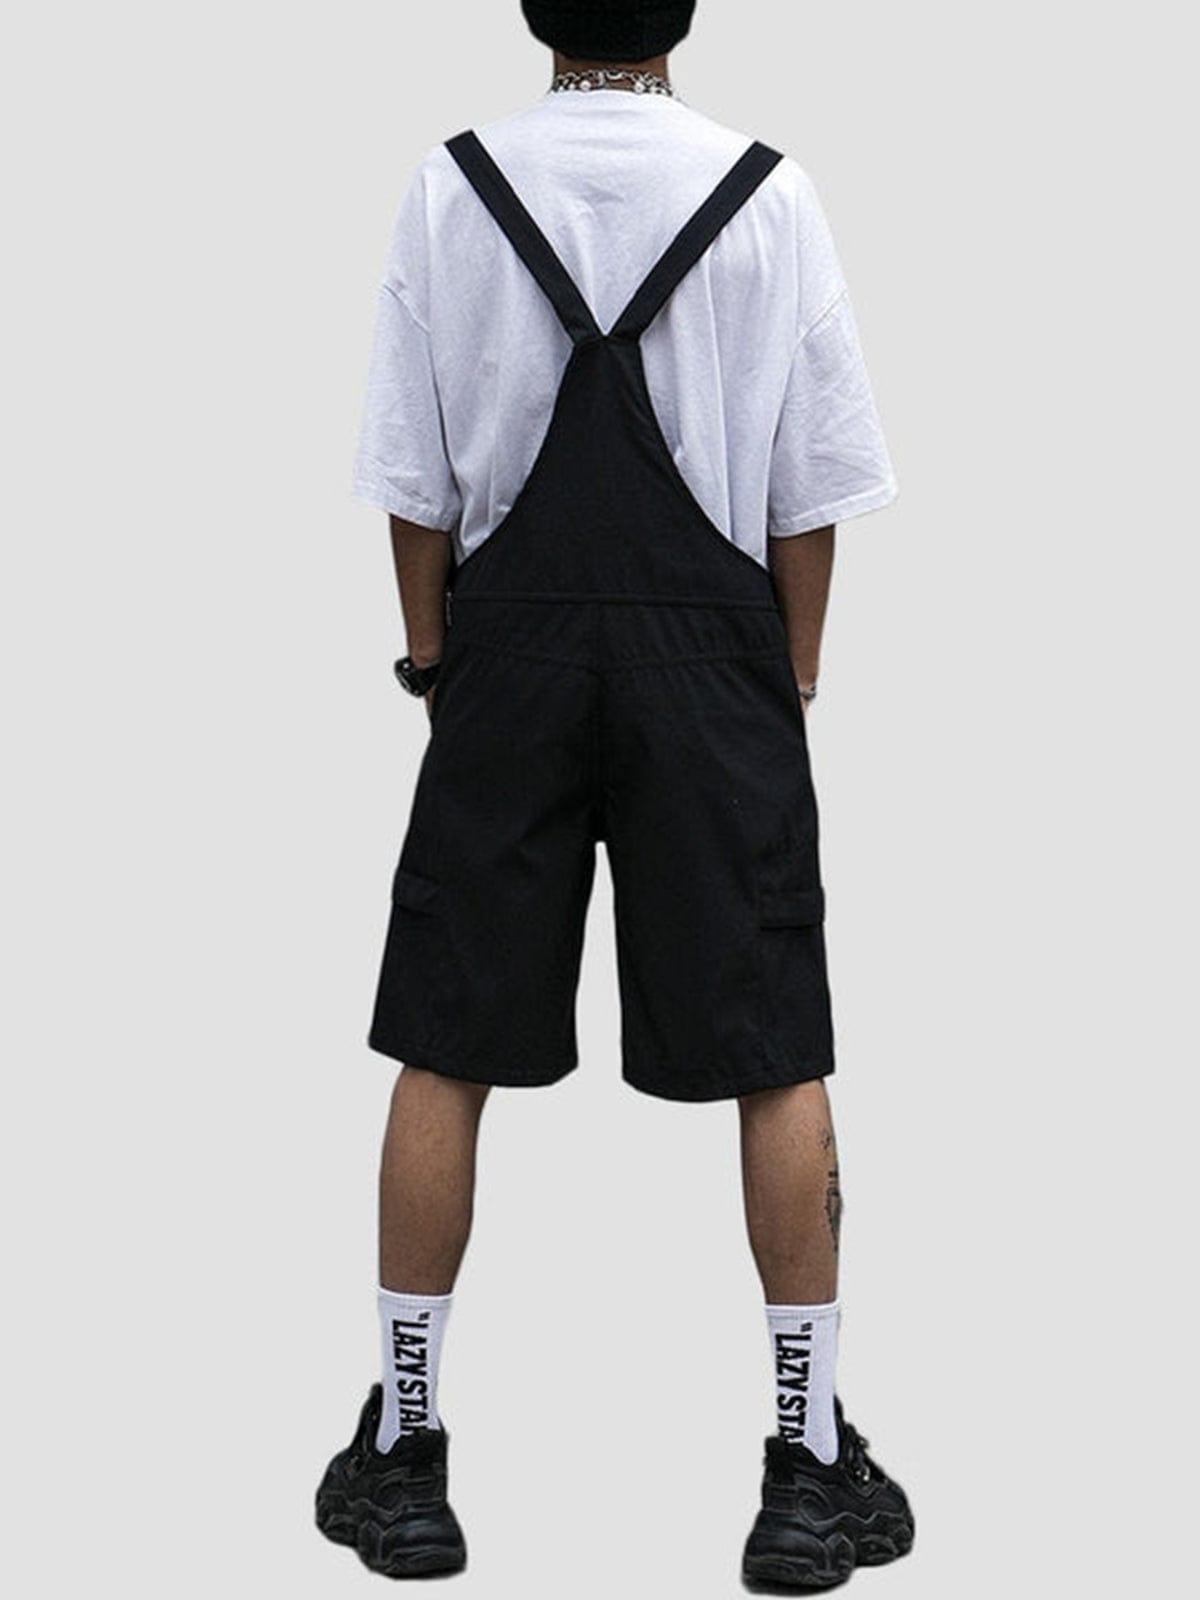 Functional Dark Solid Color Cotton overalls Streetwear Brand Techwear Combat Tactical YUGEN THEORY